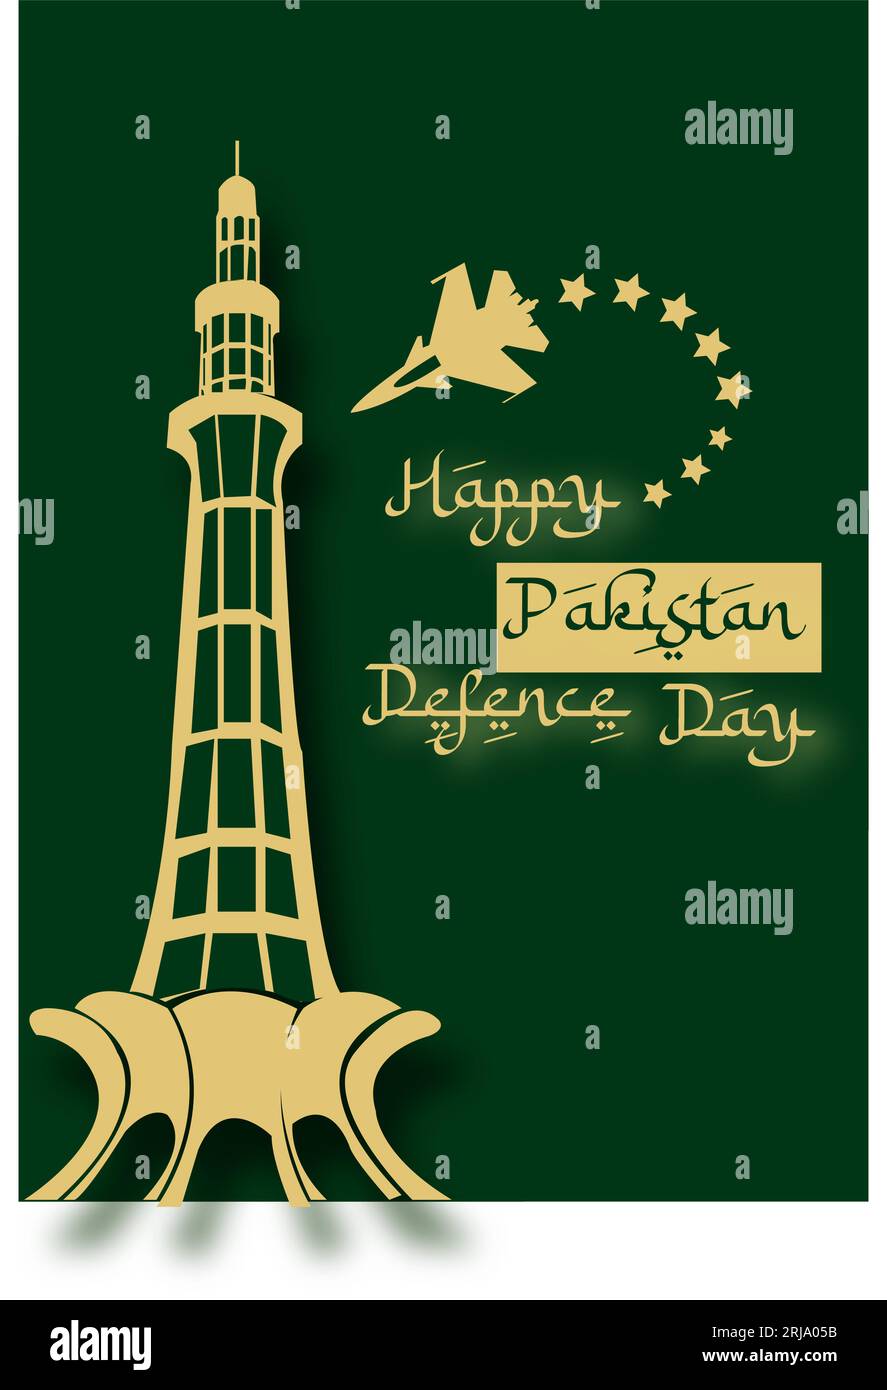 Pakistan defence day post Stock Vector